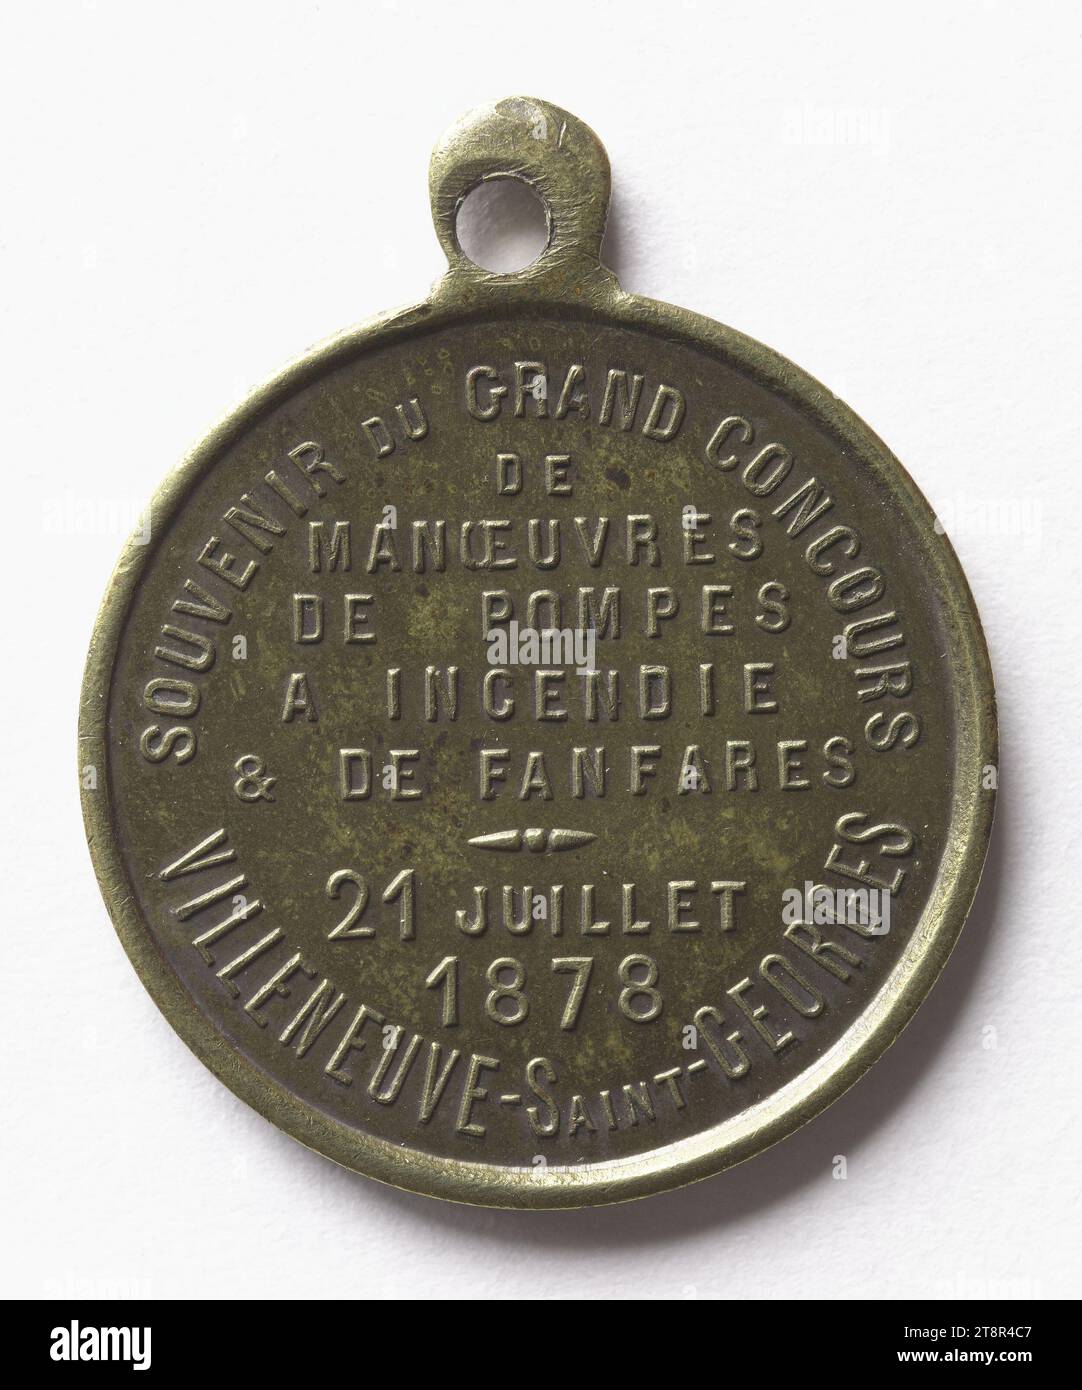 Souvenir of the great contest of maneuvers of fire pumps and brass bands in Villeneuve-Saint-Georges, July 21, 1878, In 1878, Numismatic, Medal, Copper, Silver plated = silver plating, Sizes - Work: Diameter: 3.2 cm, Weight (type size): 8.37 g Stock Photo